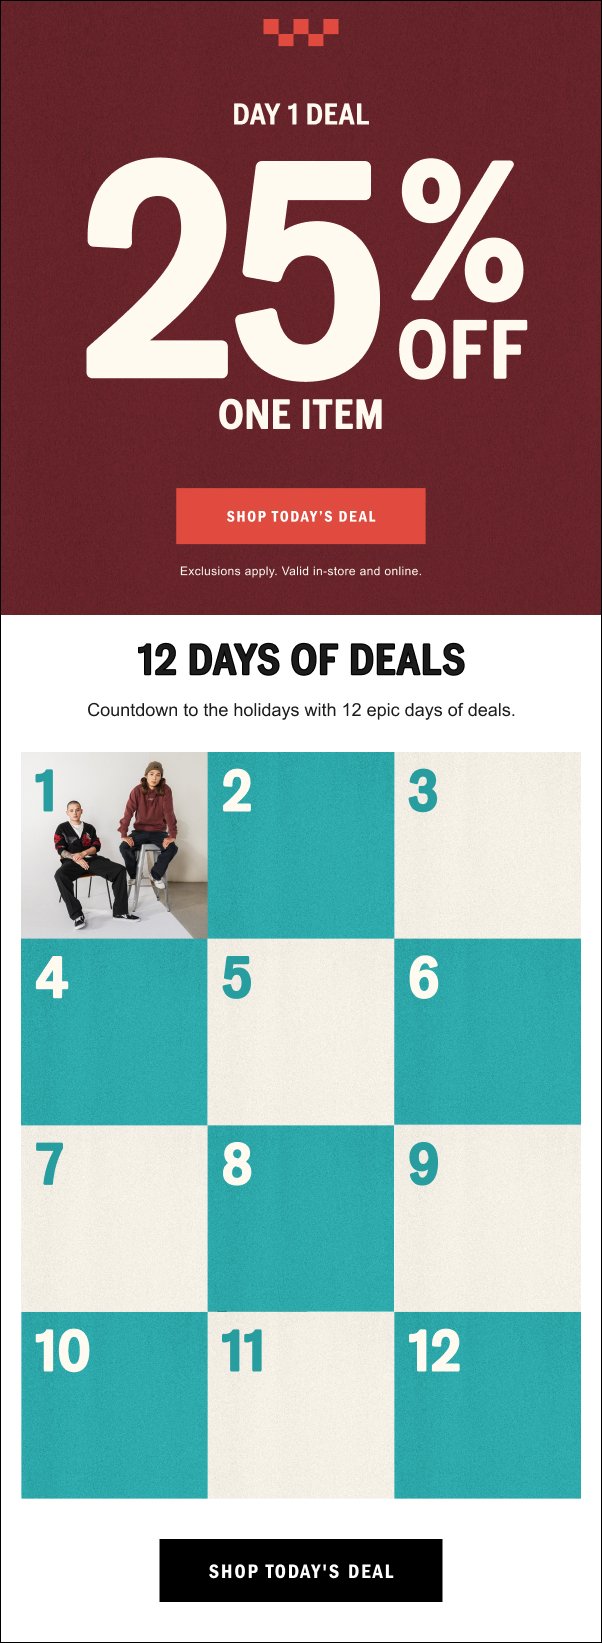 Day 1 Deal: 25% off one item. SHOP TODAY'S DEAL.